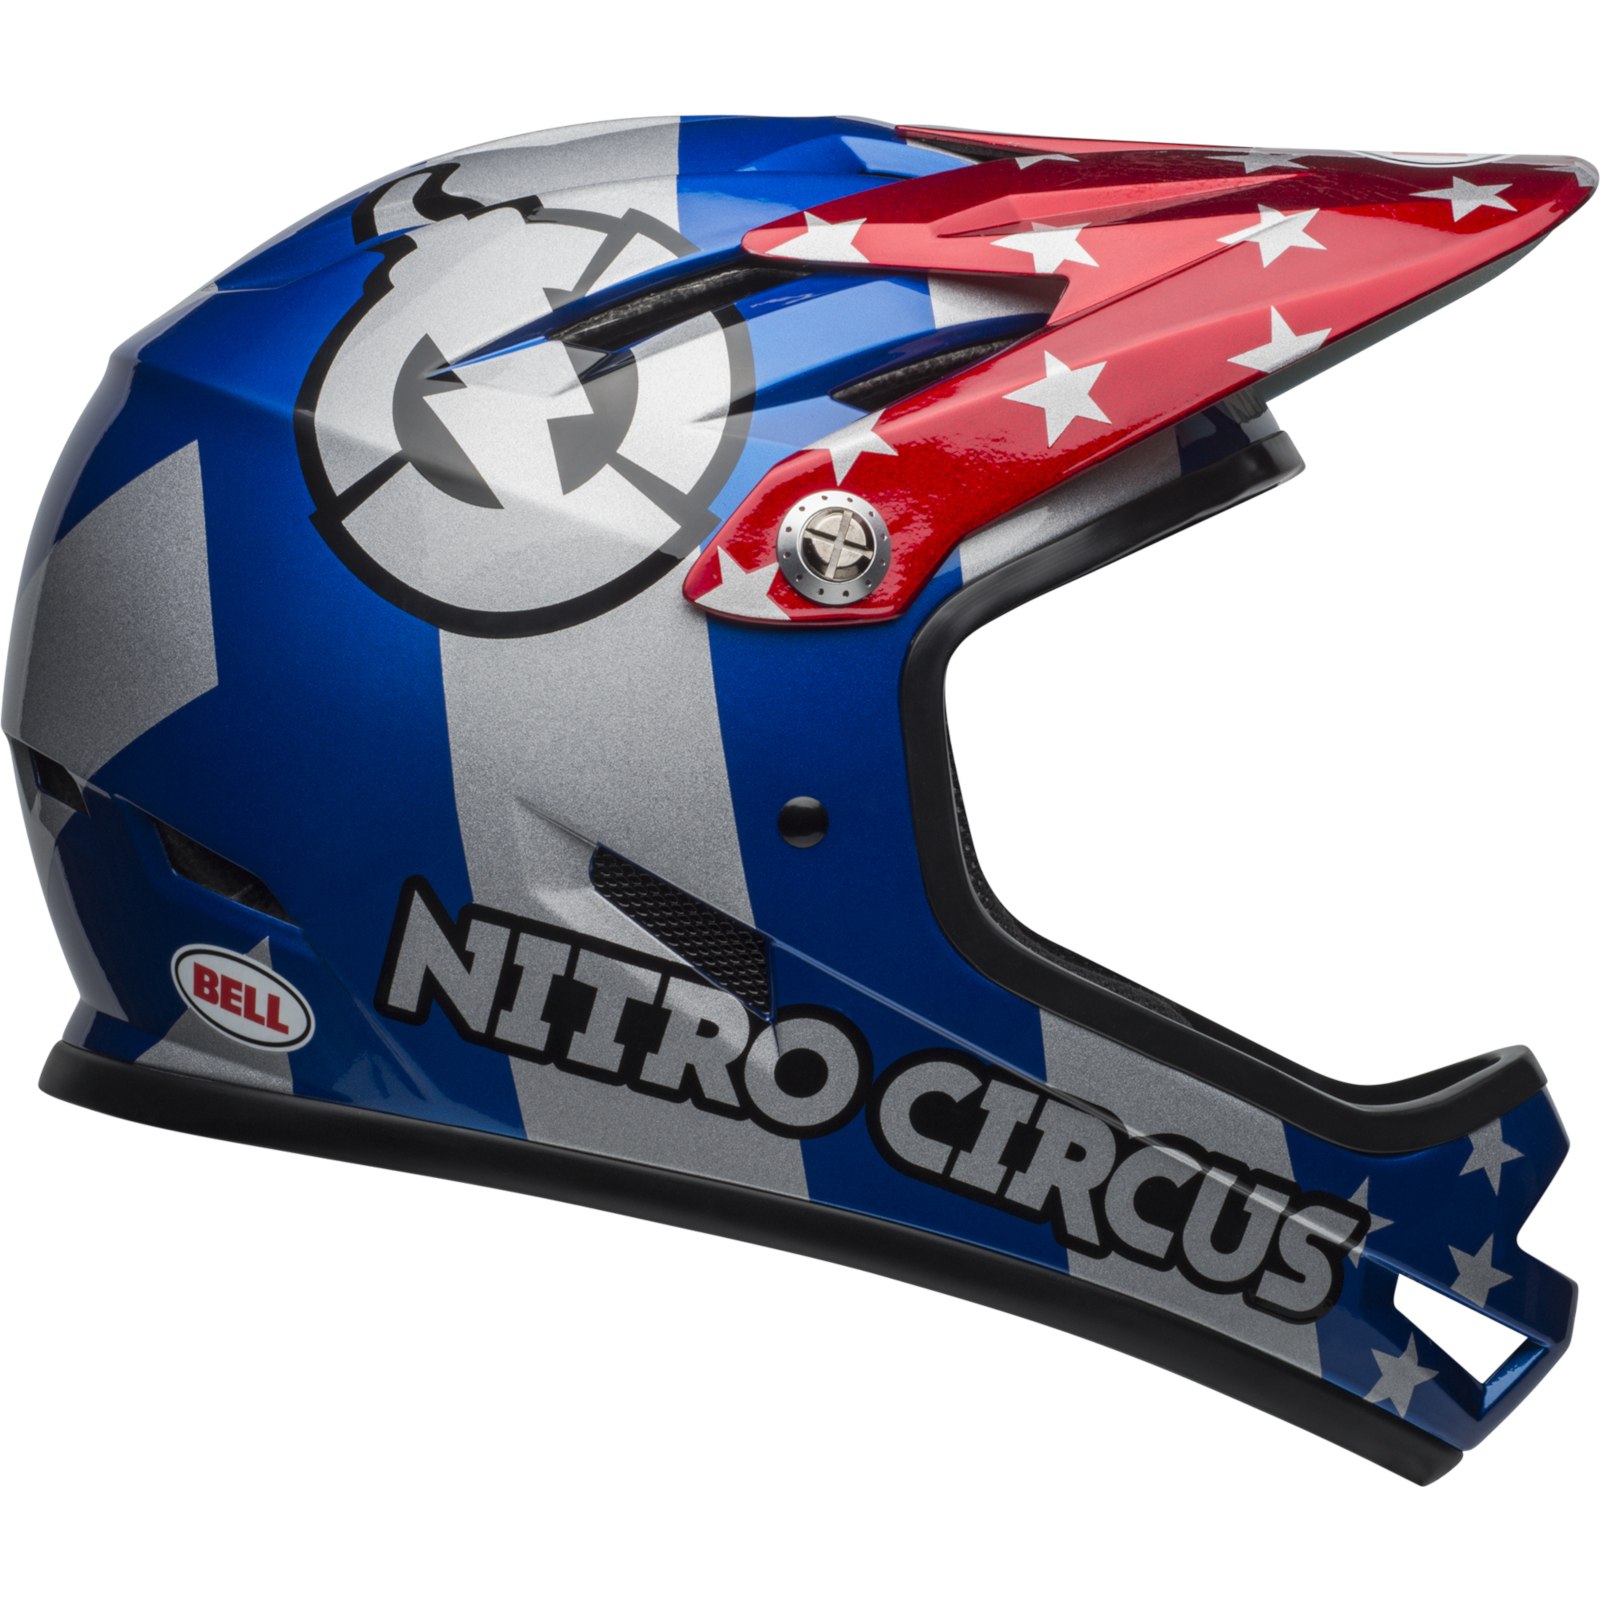 Productfoto van Bell Sanction Helm - red/silver/blue Nitro Circus